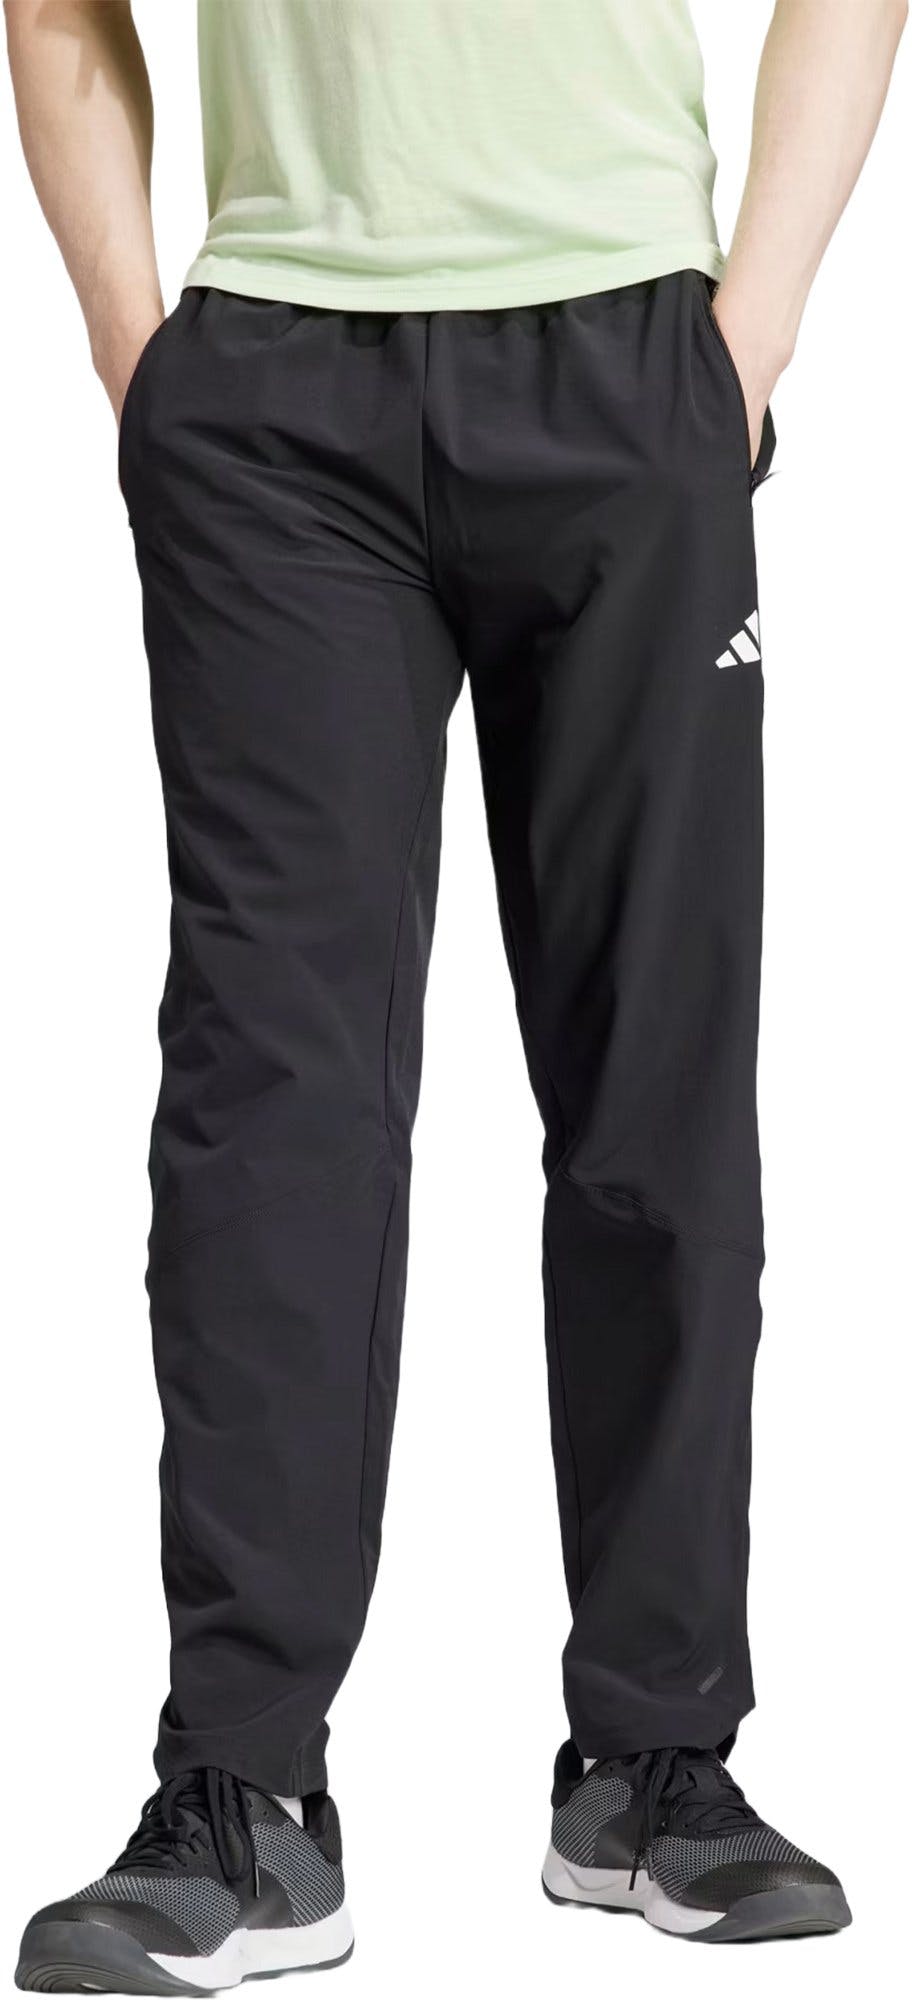 Product image for Workout Joggers - Men's